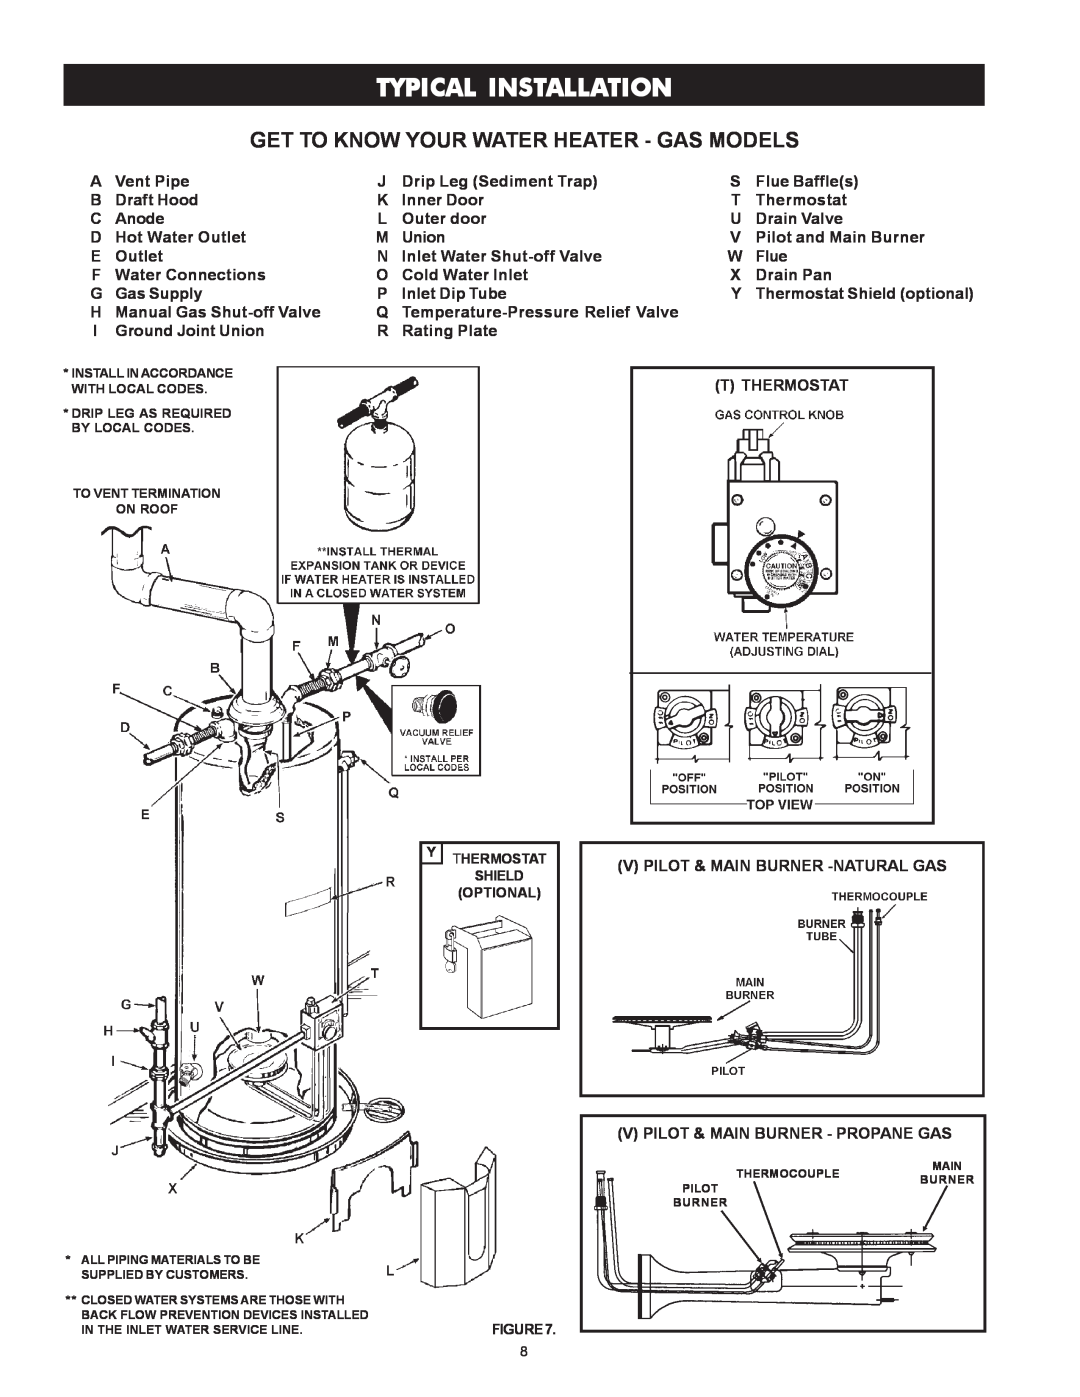 Maytag HRP4975S, HRN4975S, HRN5975S, HRP5975S manual Typical Installation, Get To Know Your Water Heater - Gas Models 